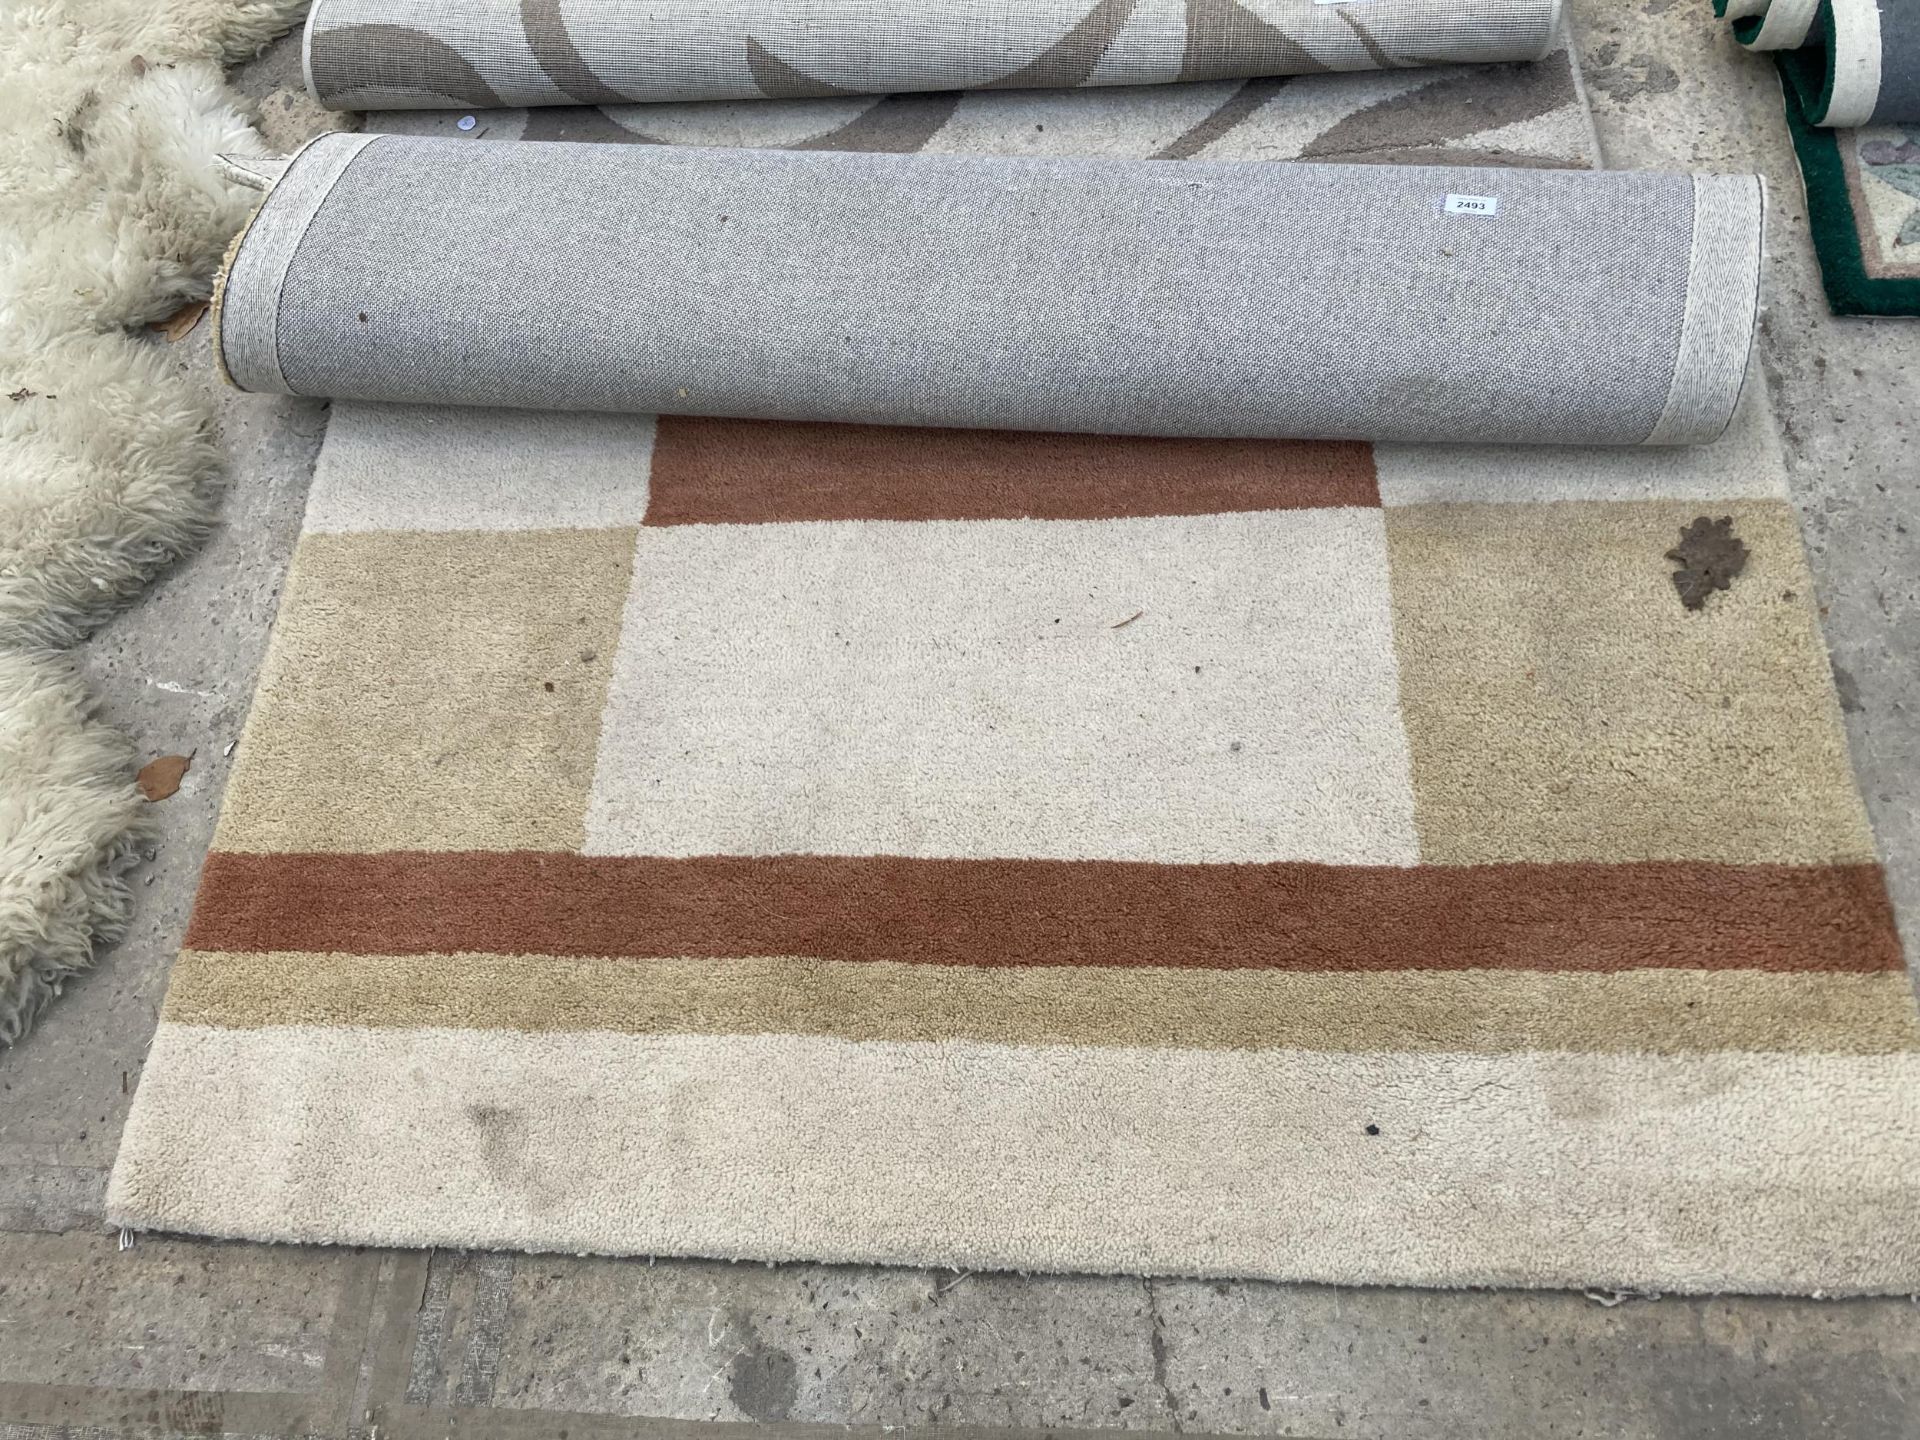 A SMALL CREAM PATTERNED FIRTH RUGS RUG